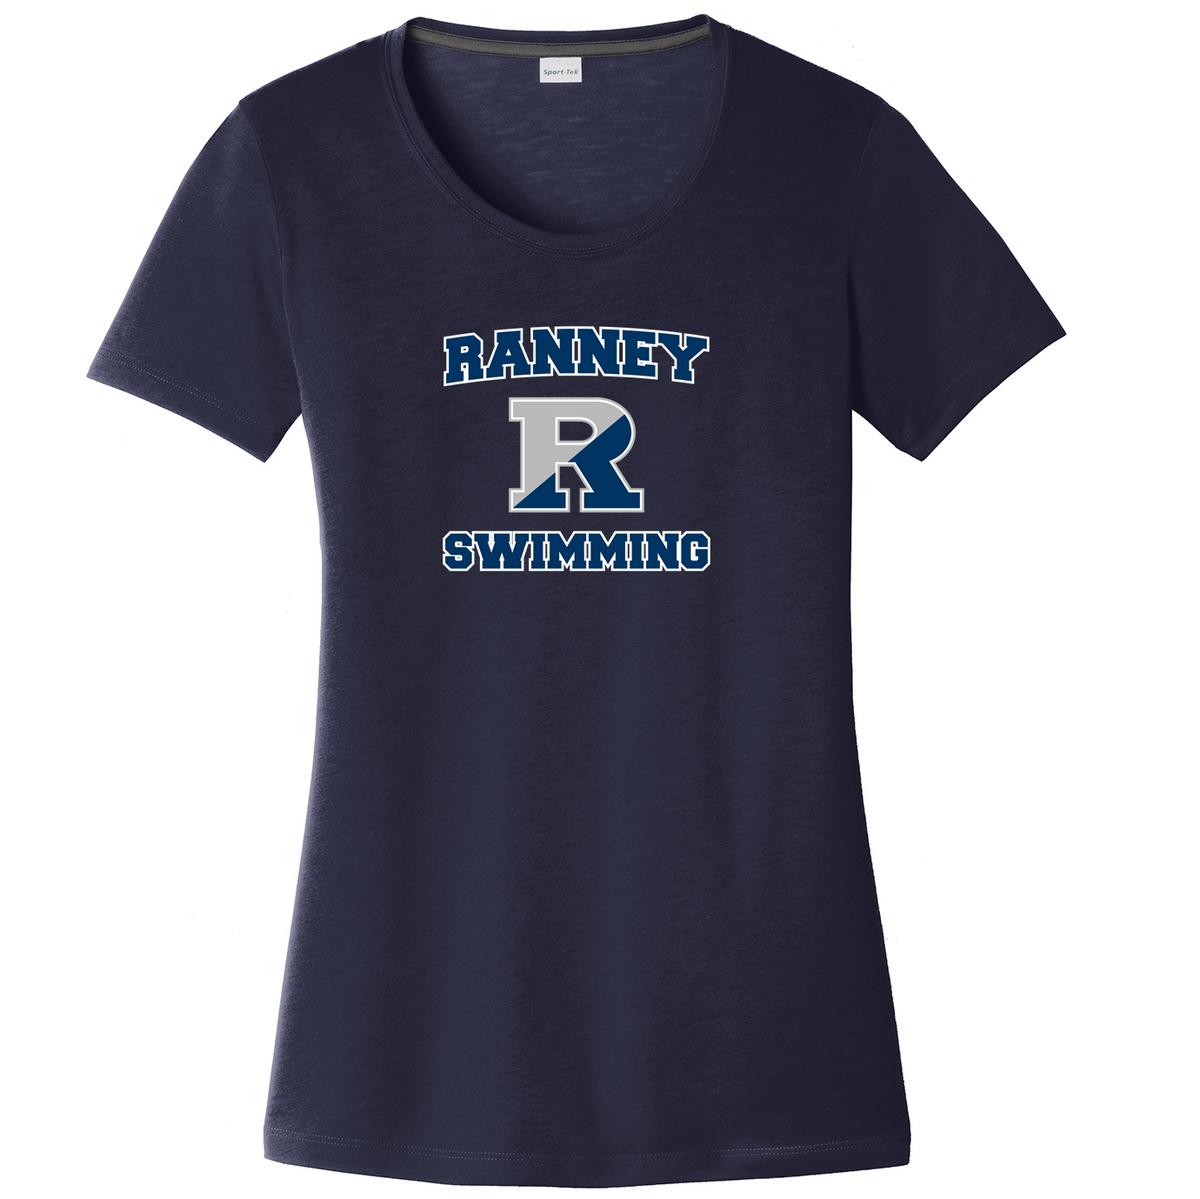 Ranney Swimming Women's CottonTouch Performance T-Shirt